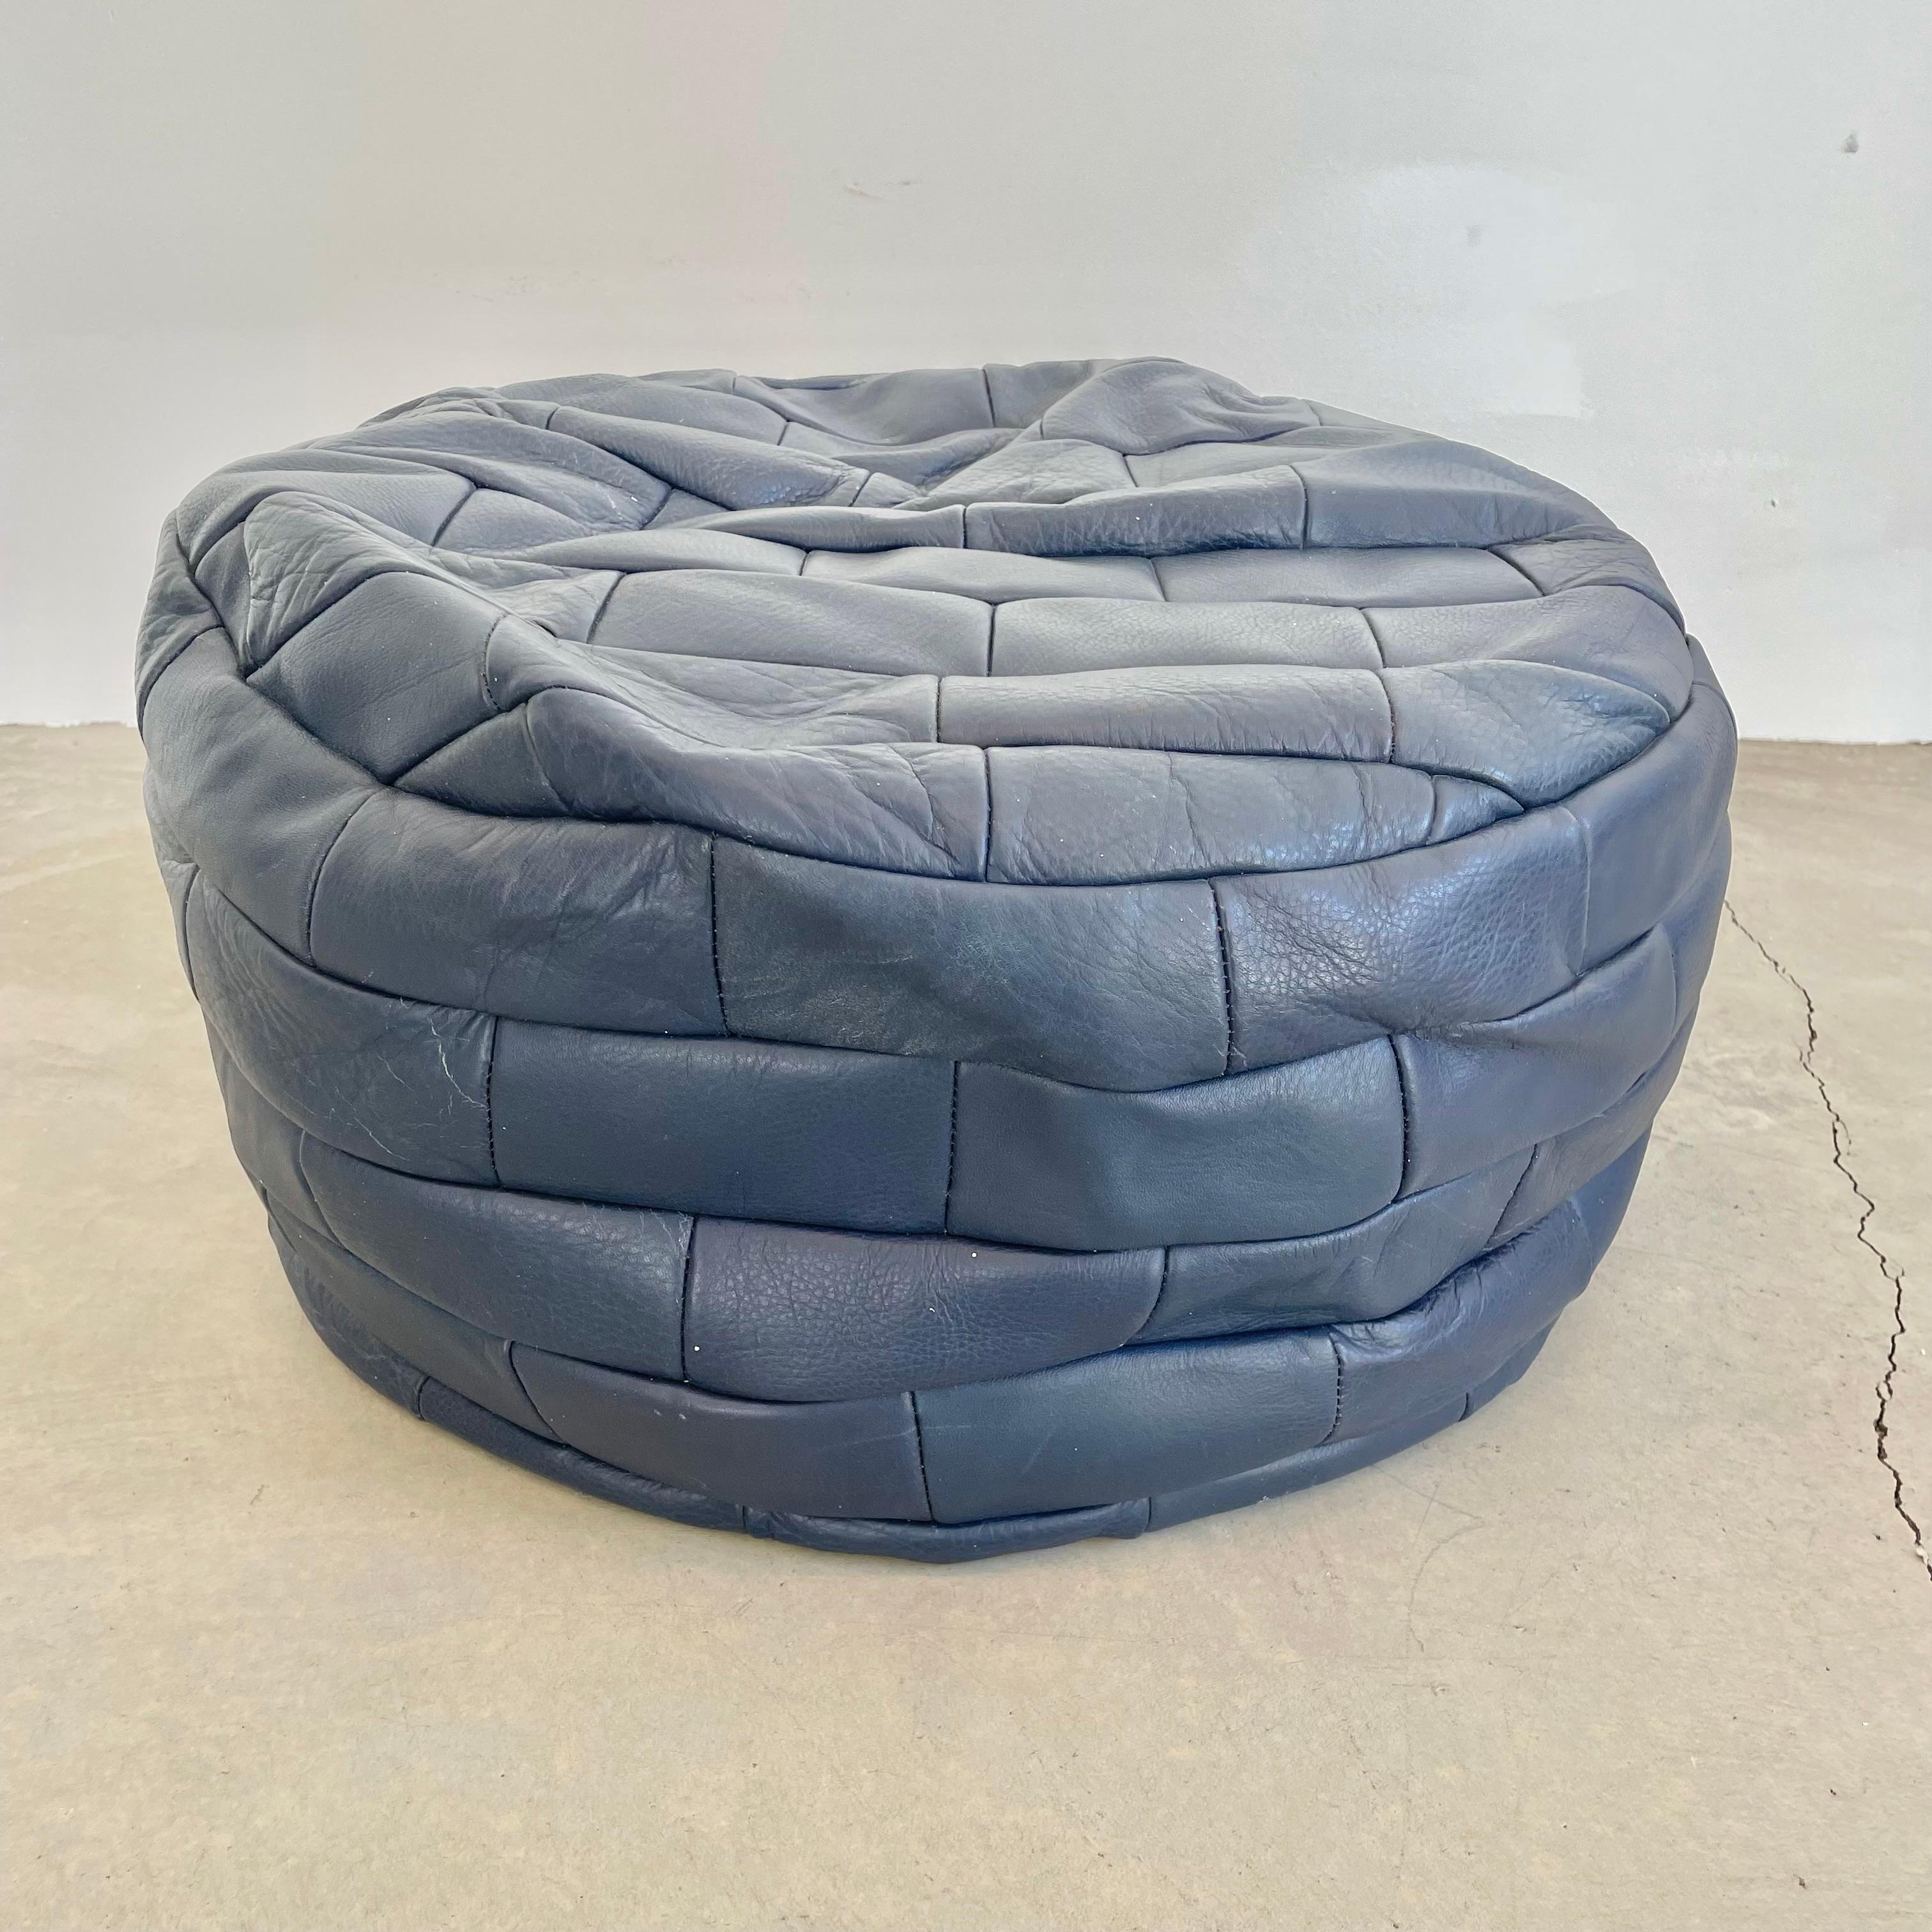 Stunning navy blue leather pouf/ottoman by Swiss designer De Sede with square patchwork. Handmade with wonderful light patina. Gorgeous accent piece. Good vintage condition with soft supple leather. Brand new filler. Perfect living room decor, foot